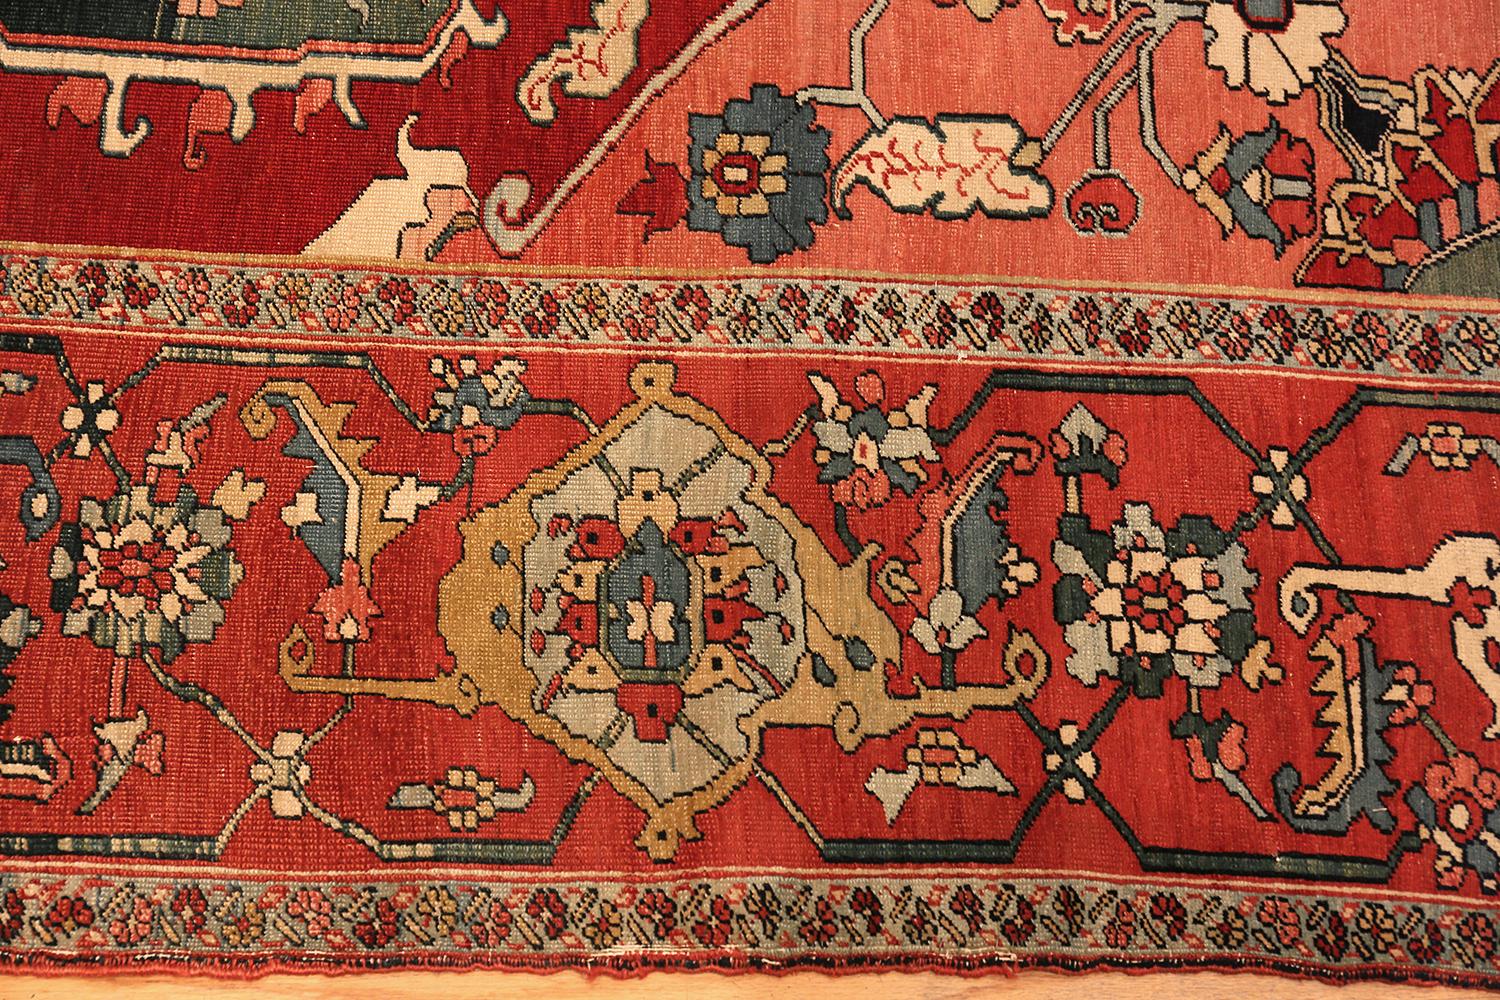 Breathtaking room sized antique Serapi rug, country of origin / rug type: antique Persian rugs, date: circa 1880. Size: 8 ft 8 in x 10 ft 7 in (2.64 m x 3.23 m).